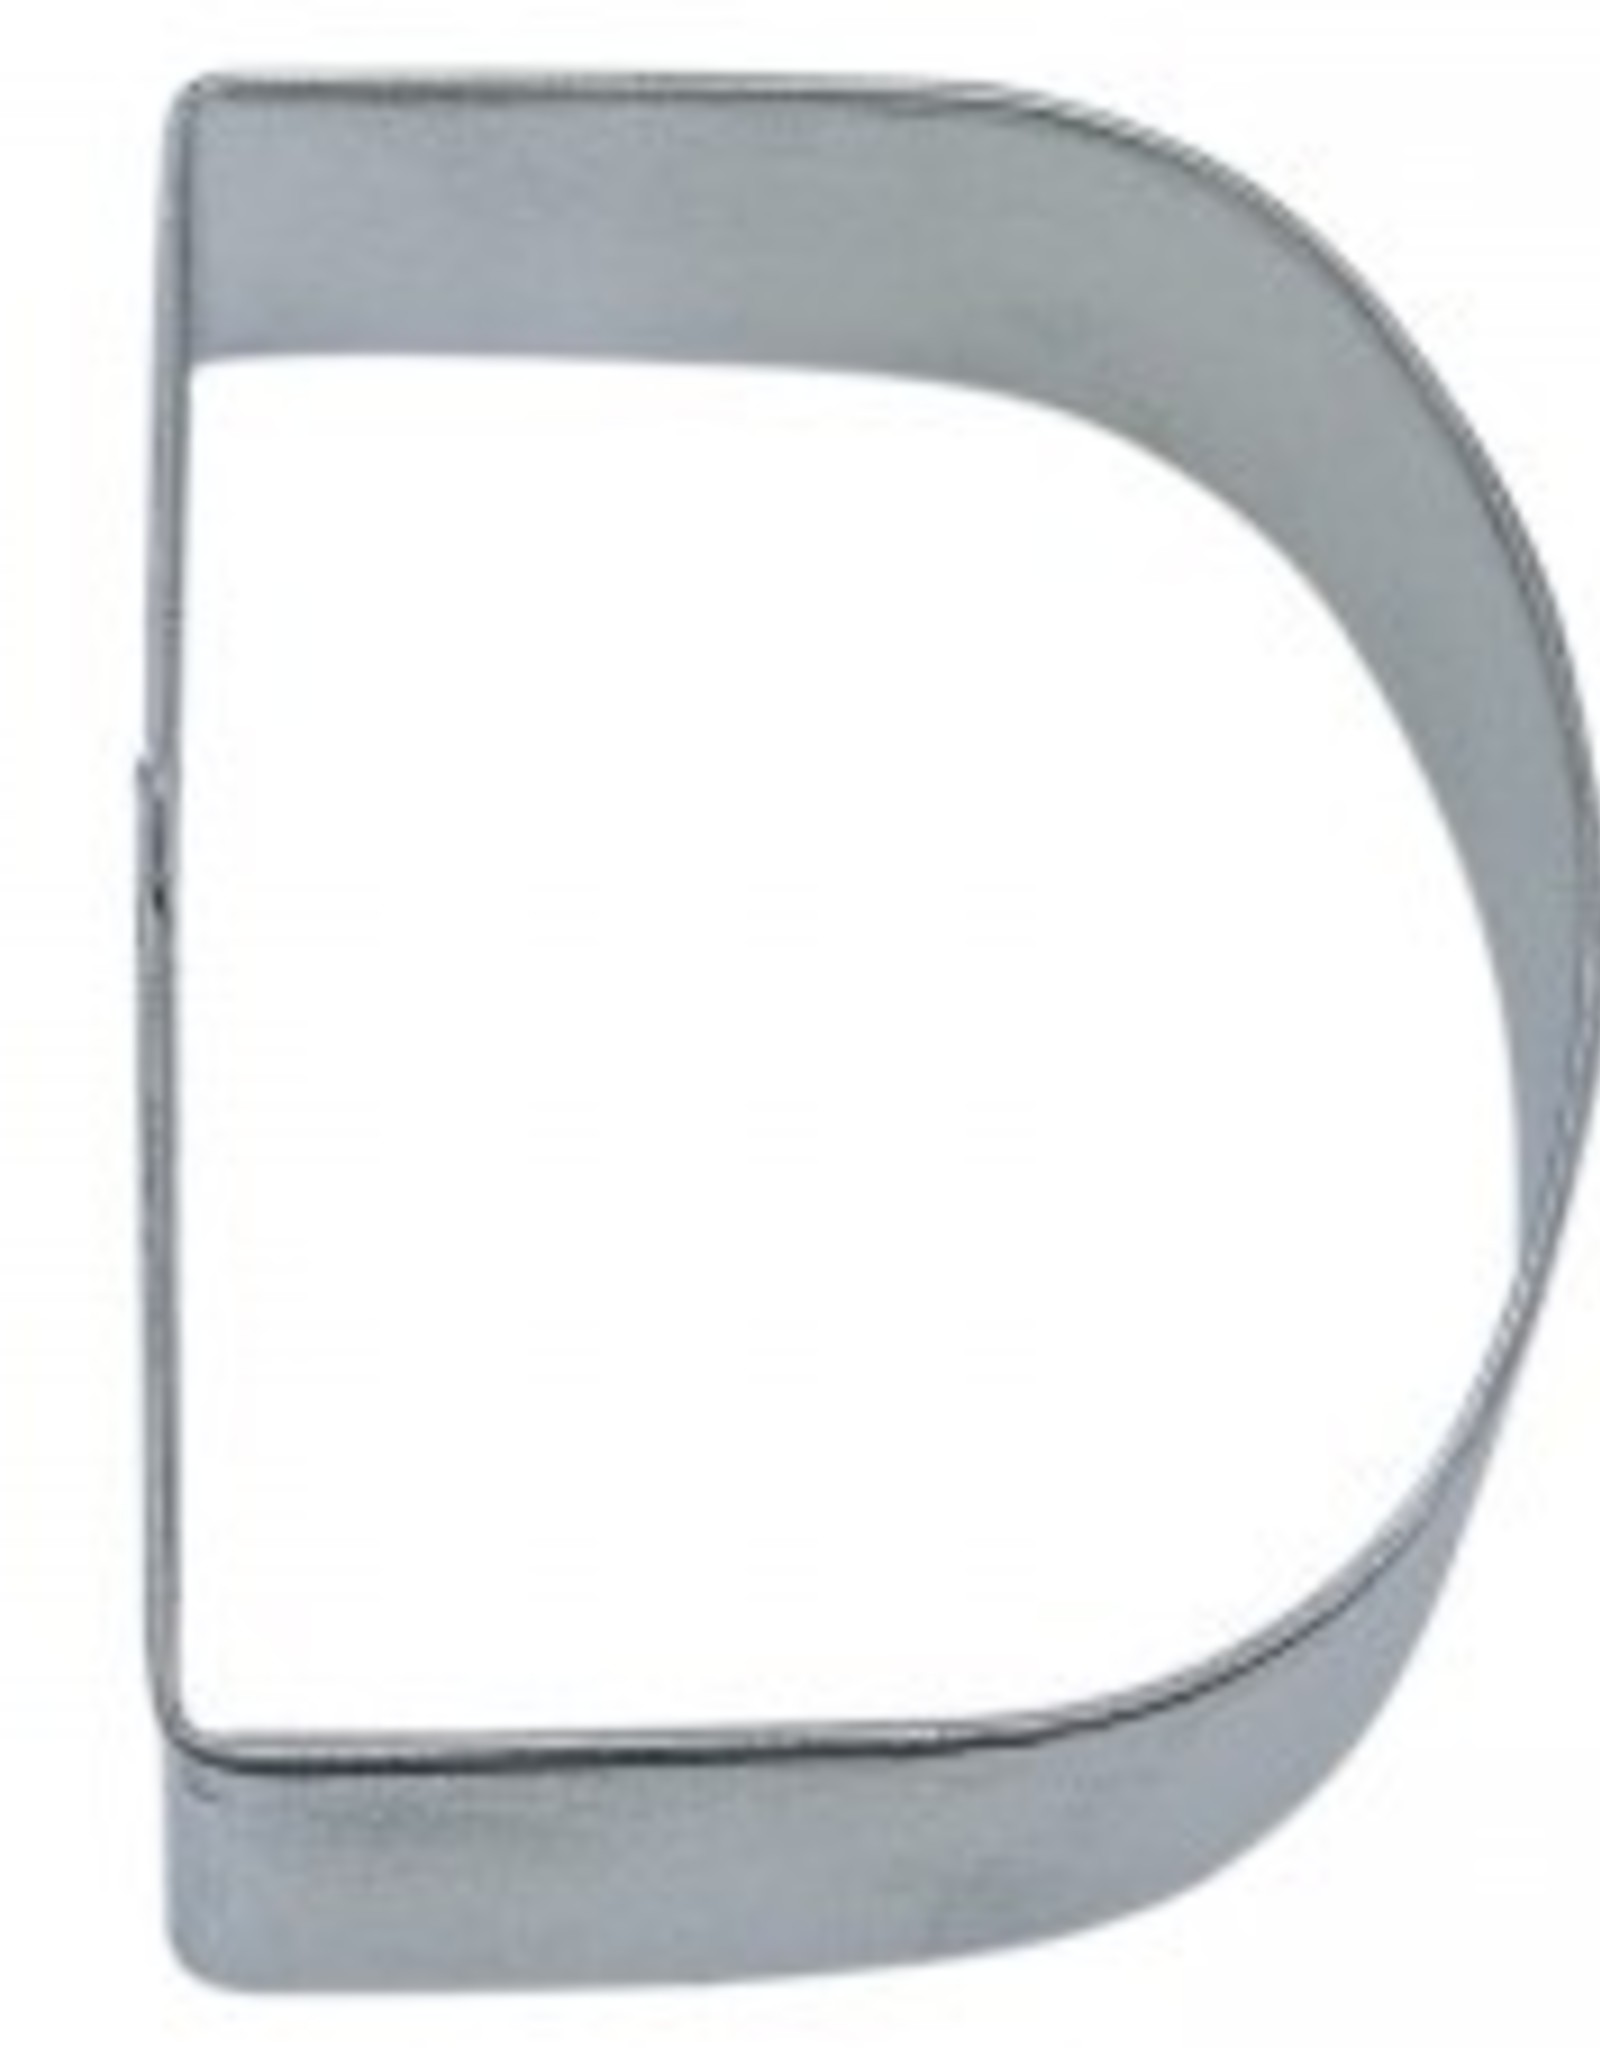 Letter "D" Cookie Cutter